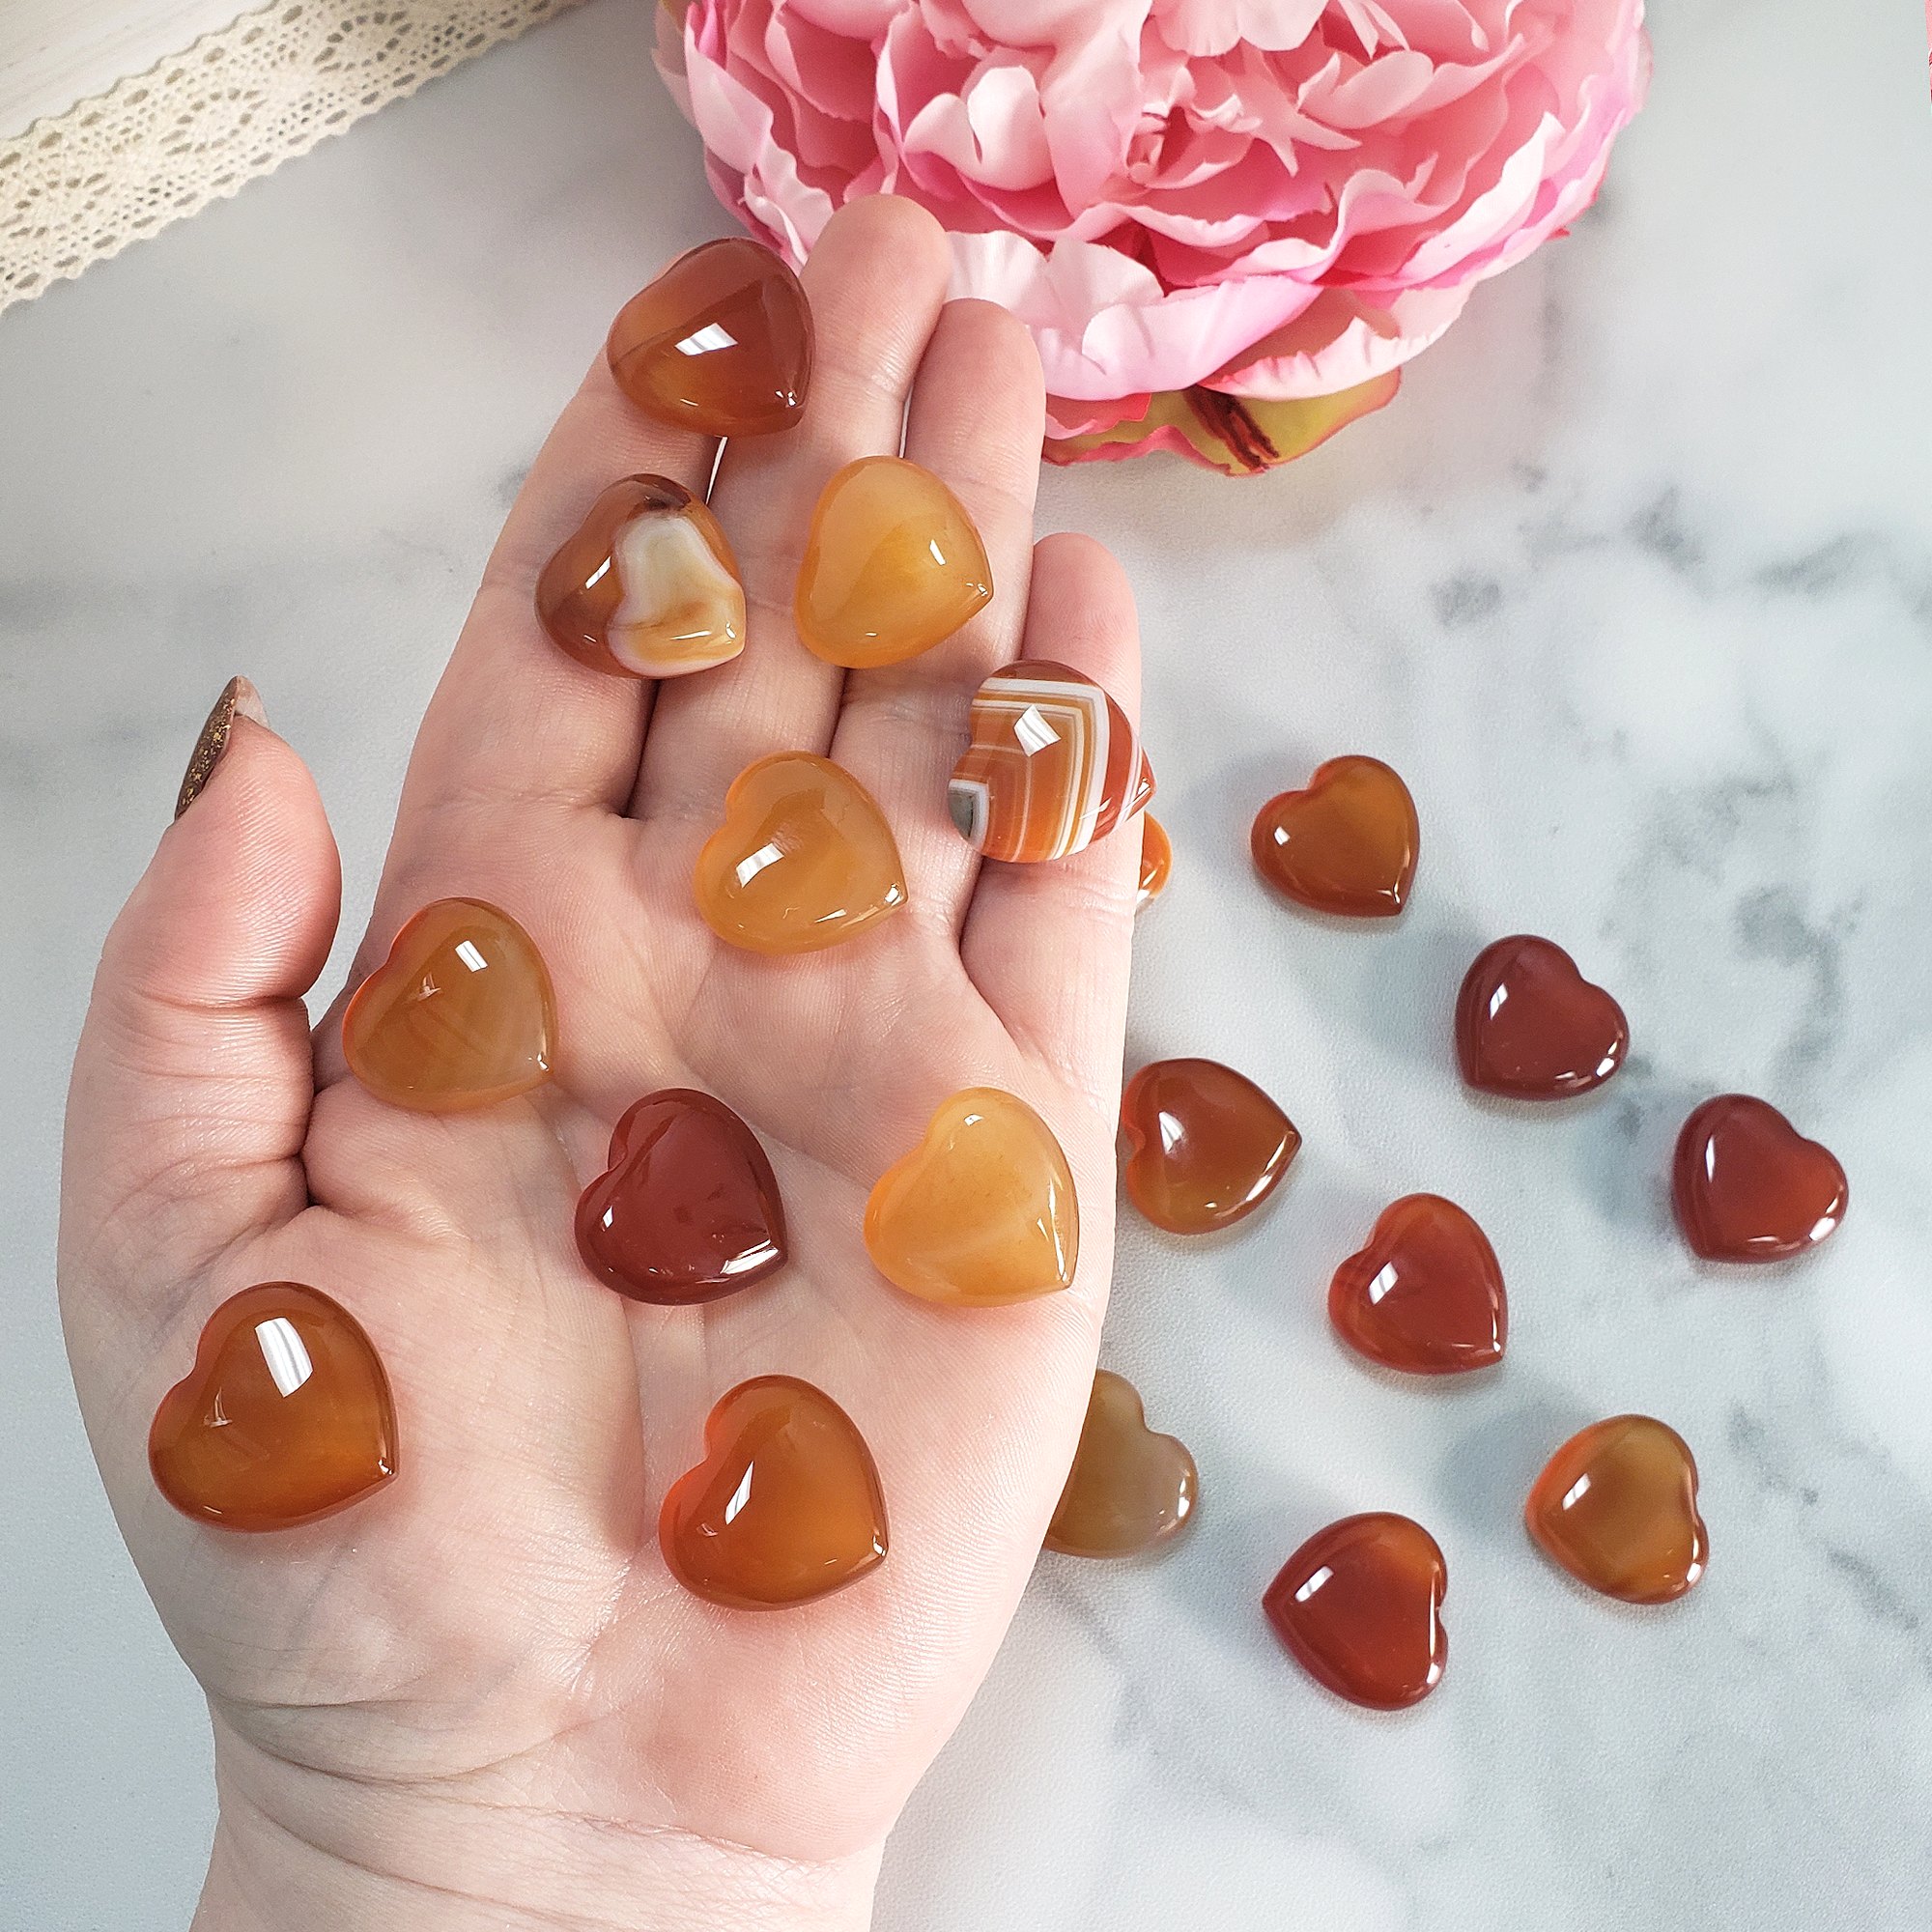 Carnelian Stone Natural Crystal Heart Mini Carving - Gemstone Heart Shaped Carvings in Hand